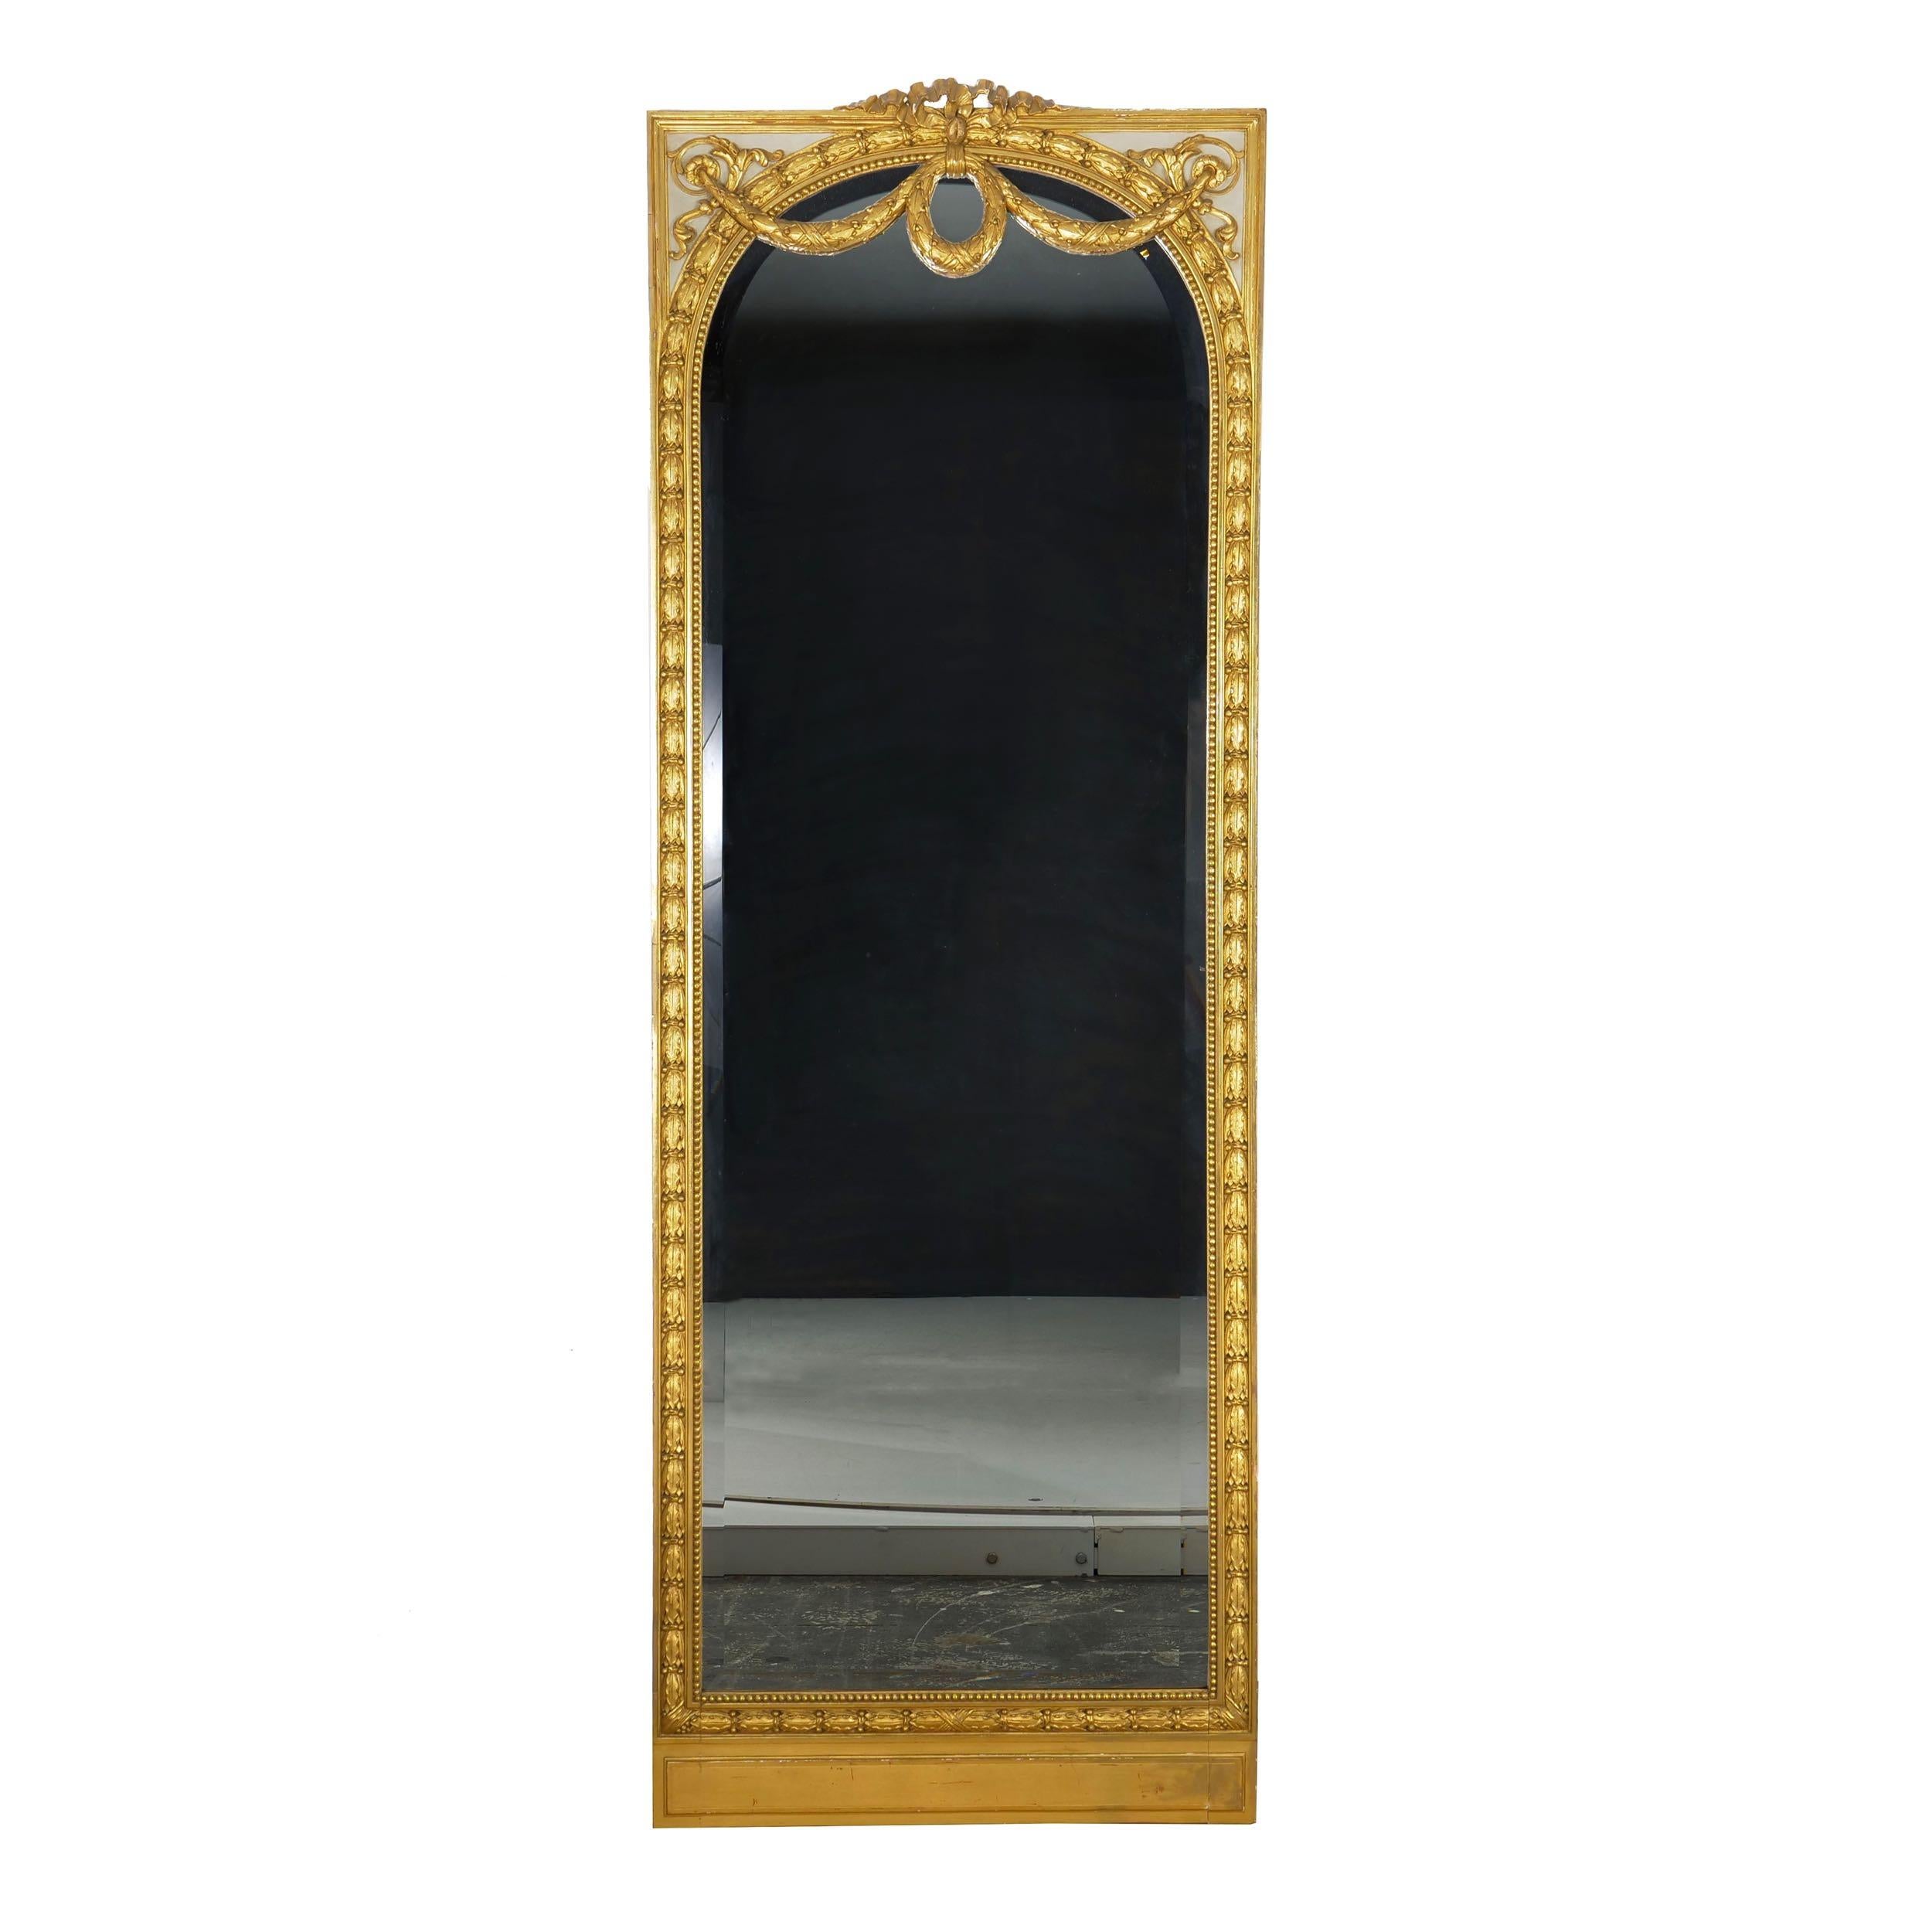 Exquisite pair of French Louis XVI style full length mirror
Parisian quality, circa early 20th century
Item # 007OGW30Z 

A very fine pair of full-length mirrors, these angular objects are of exquisite quality - both in conceived design and in